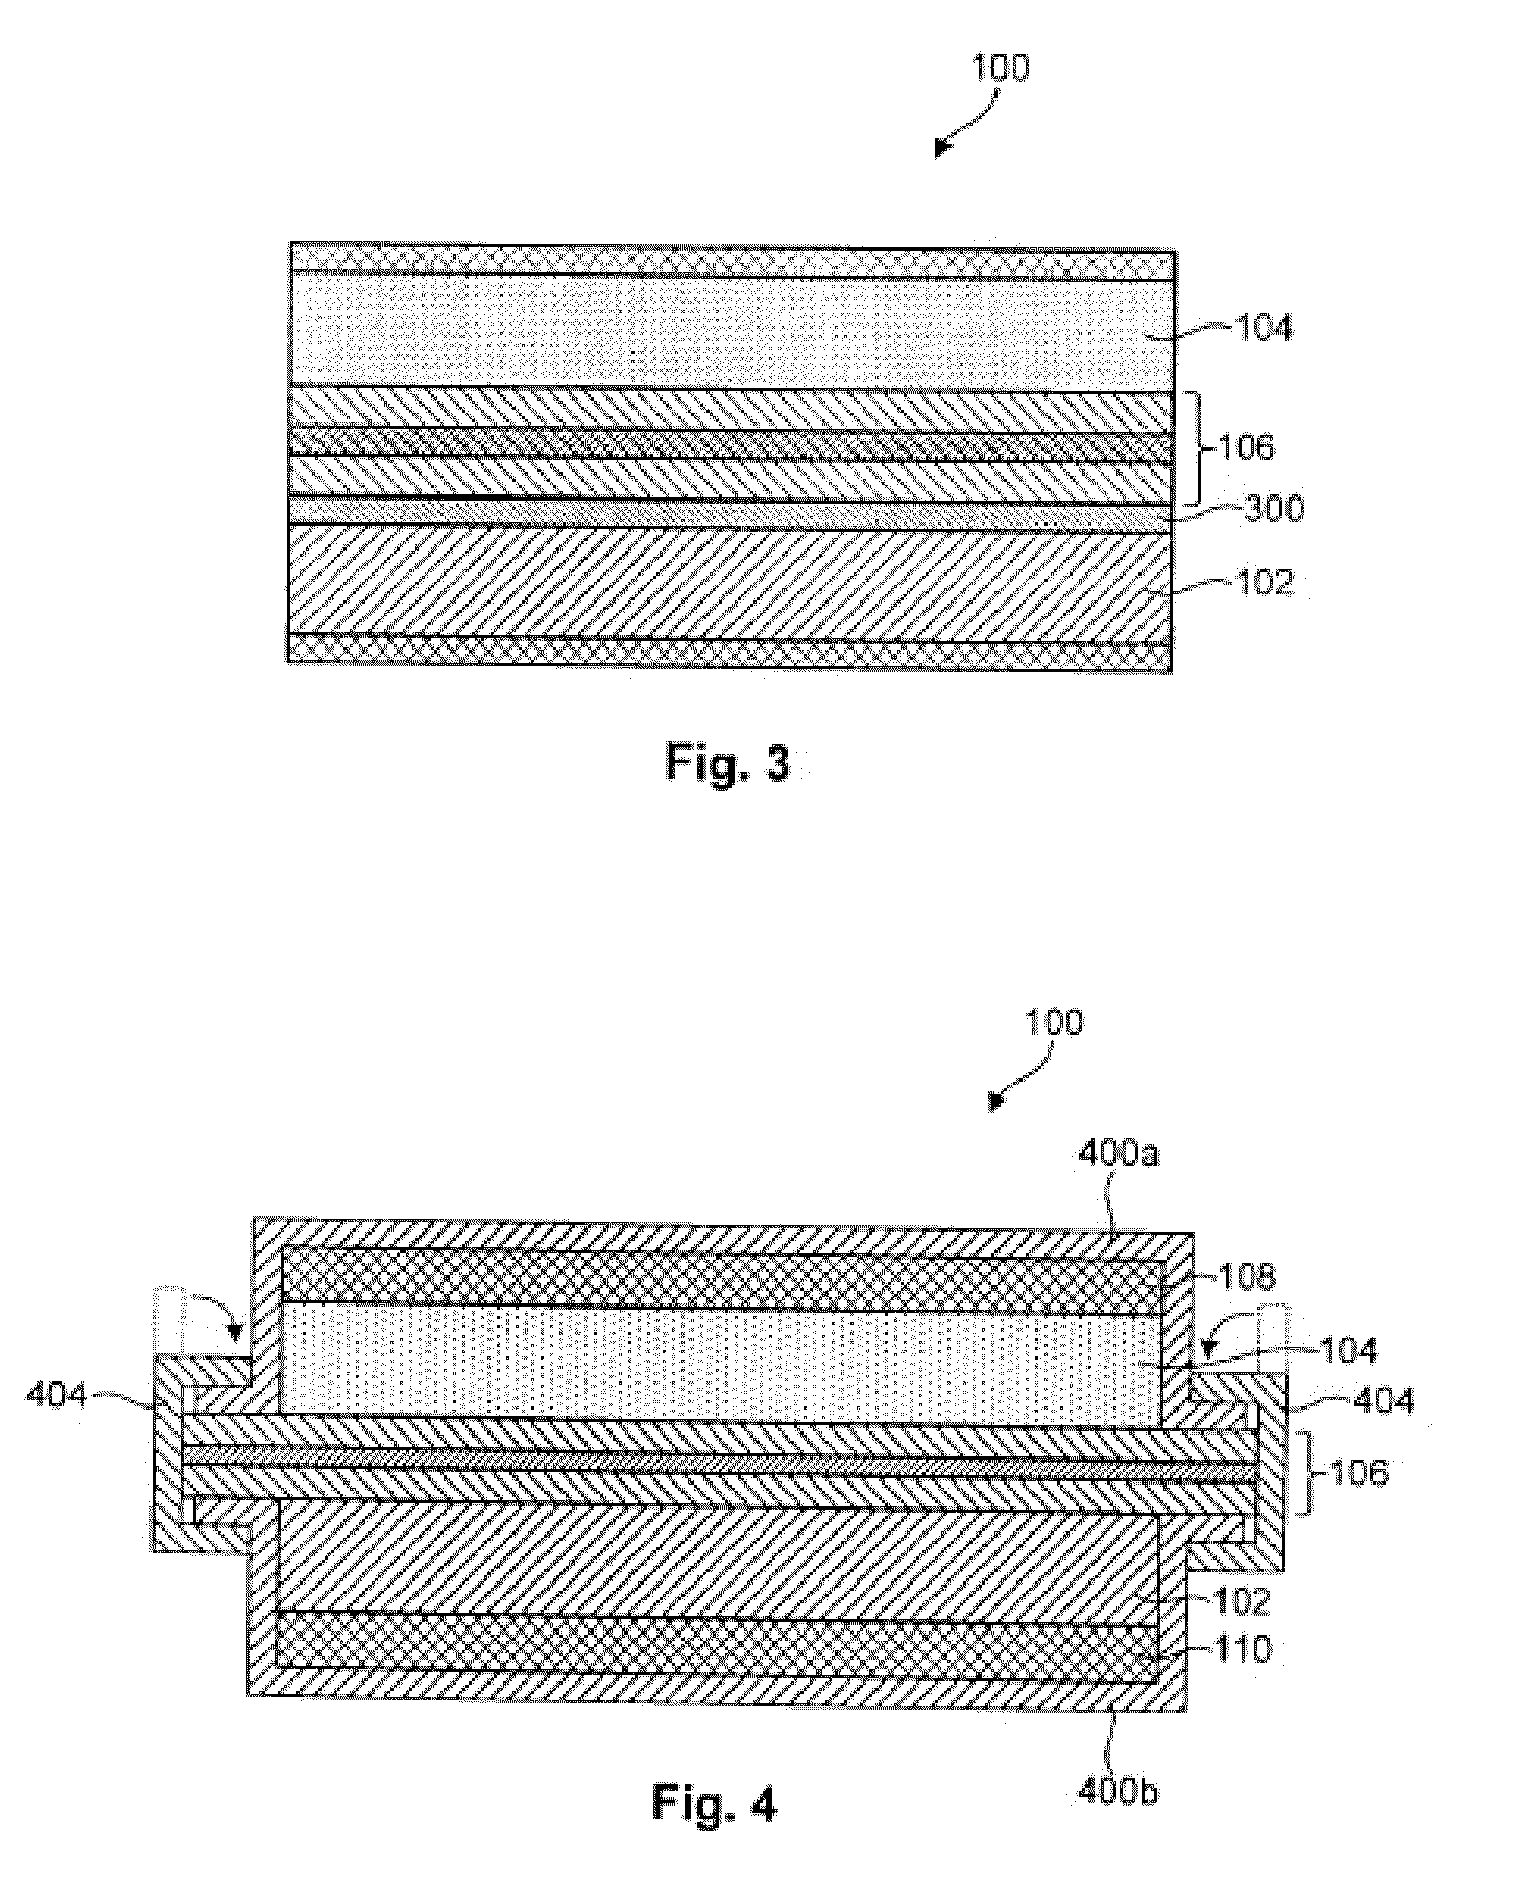 Sodium-sulfur battery with a substantially non-porous membrane and enhanced cathode utilization